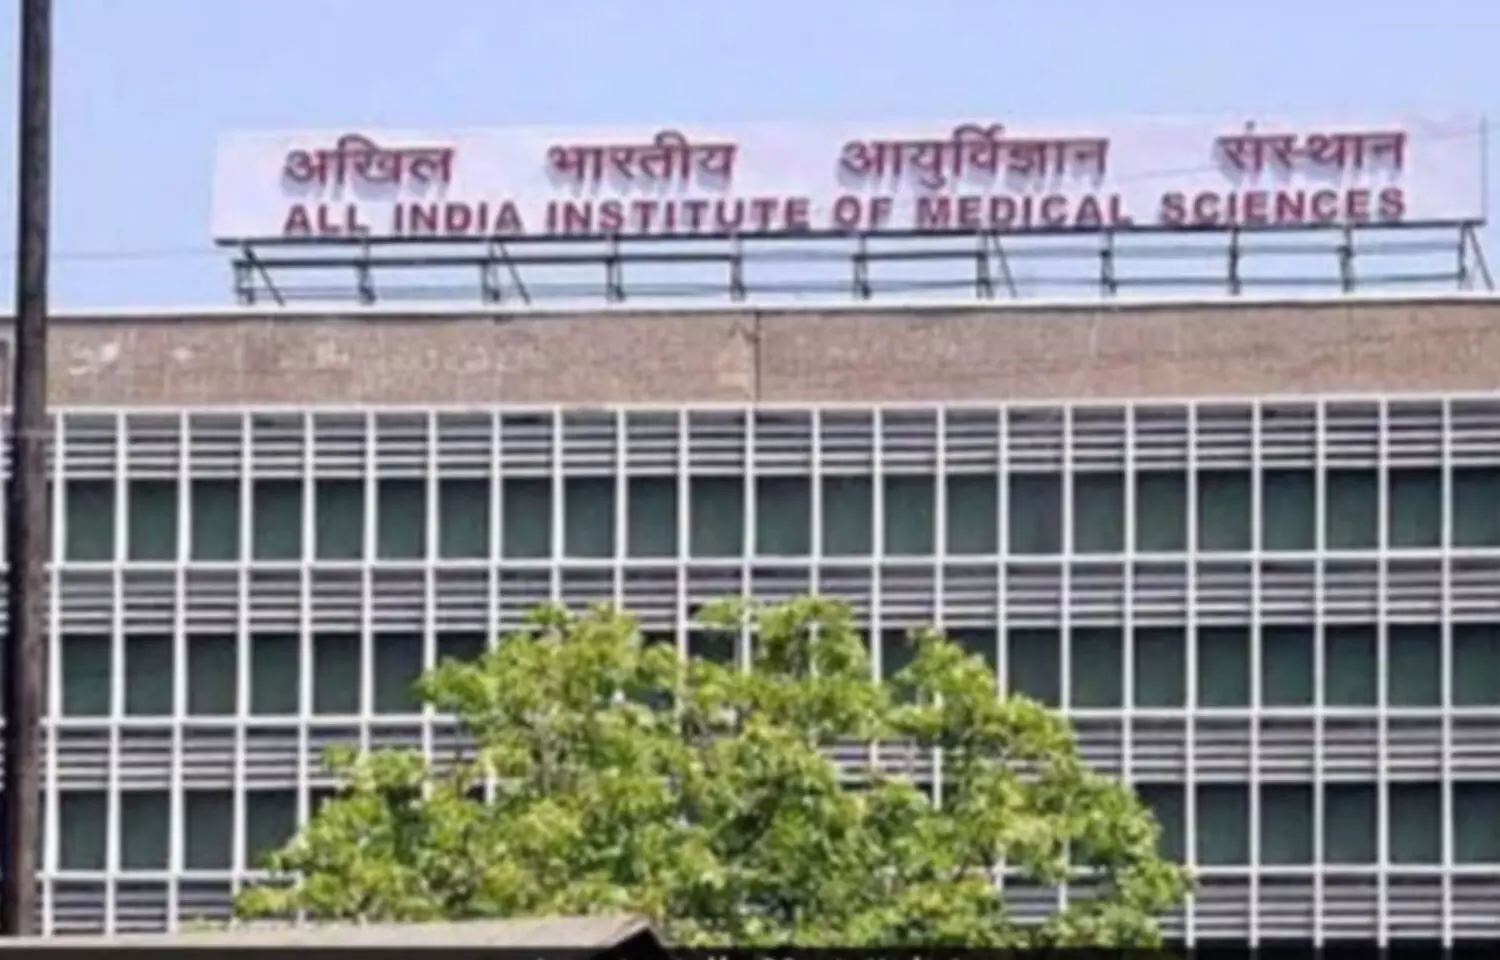 Kerala: New AIIMS to come up in Kinalur, Govt allots 153.46 acres of land